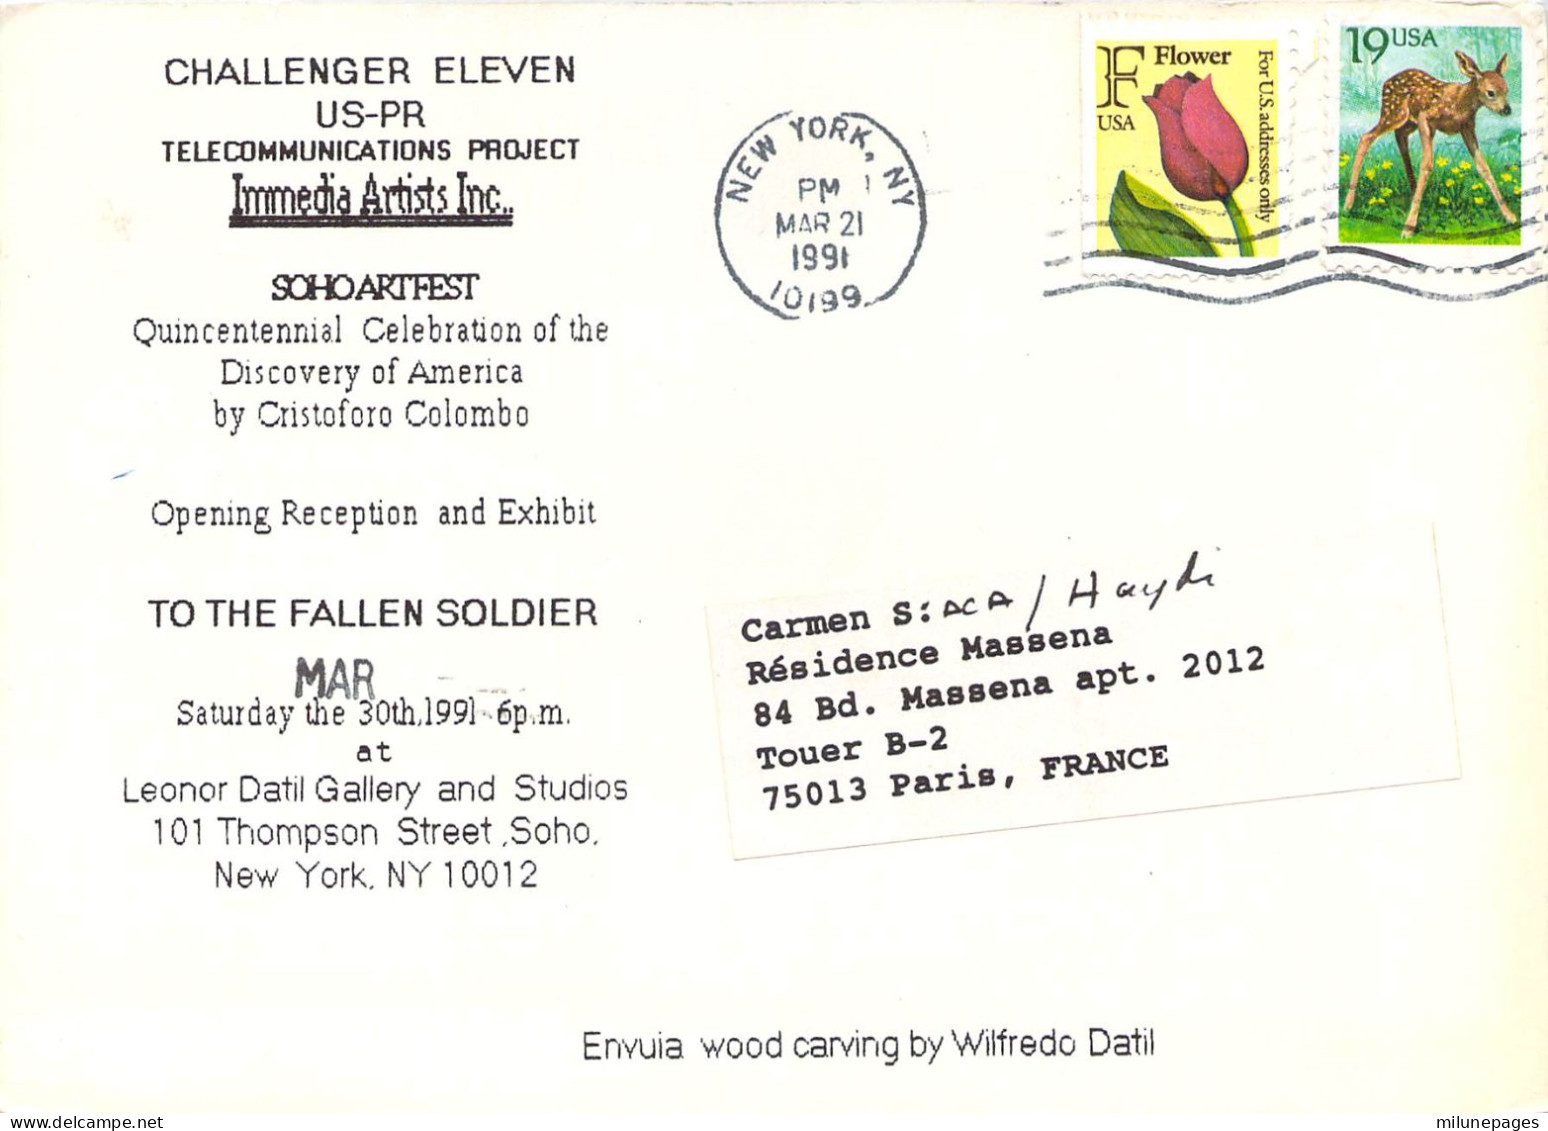 USA NY Challenger Eleven US-PR Immedia Artists Inc. Sohoartfest Mar. 1991 Enyuia Wood Carving By Wilfredo Datil - Exhibitions